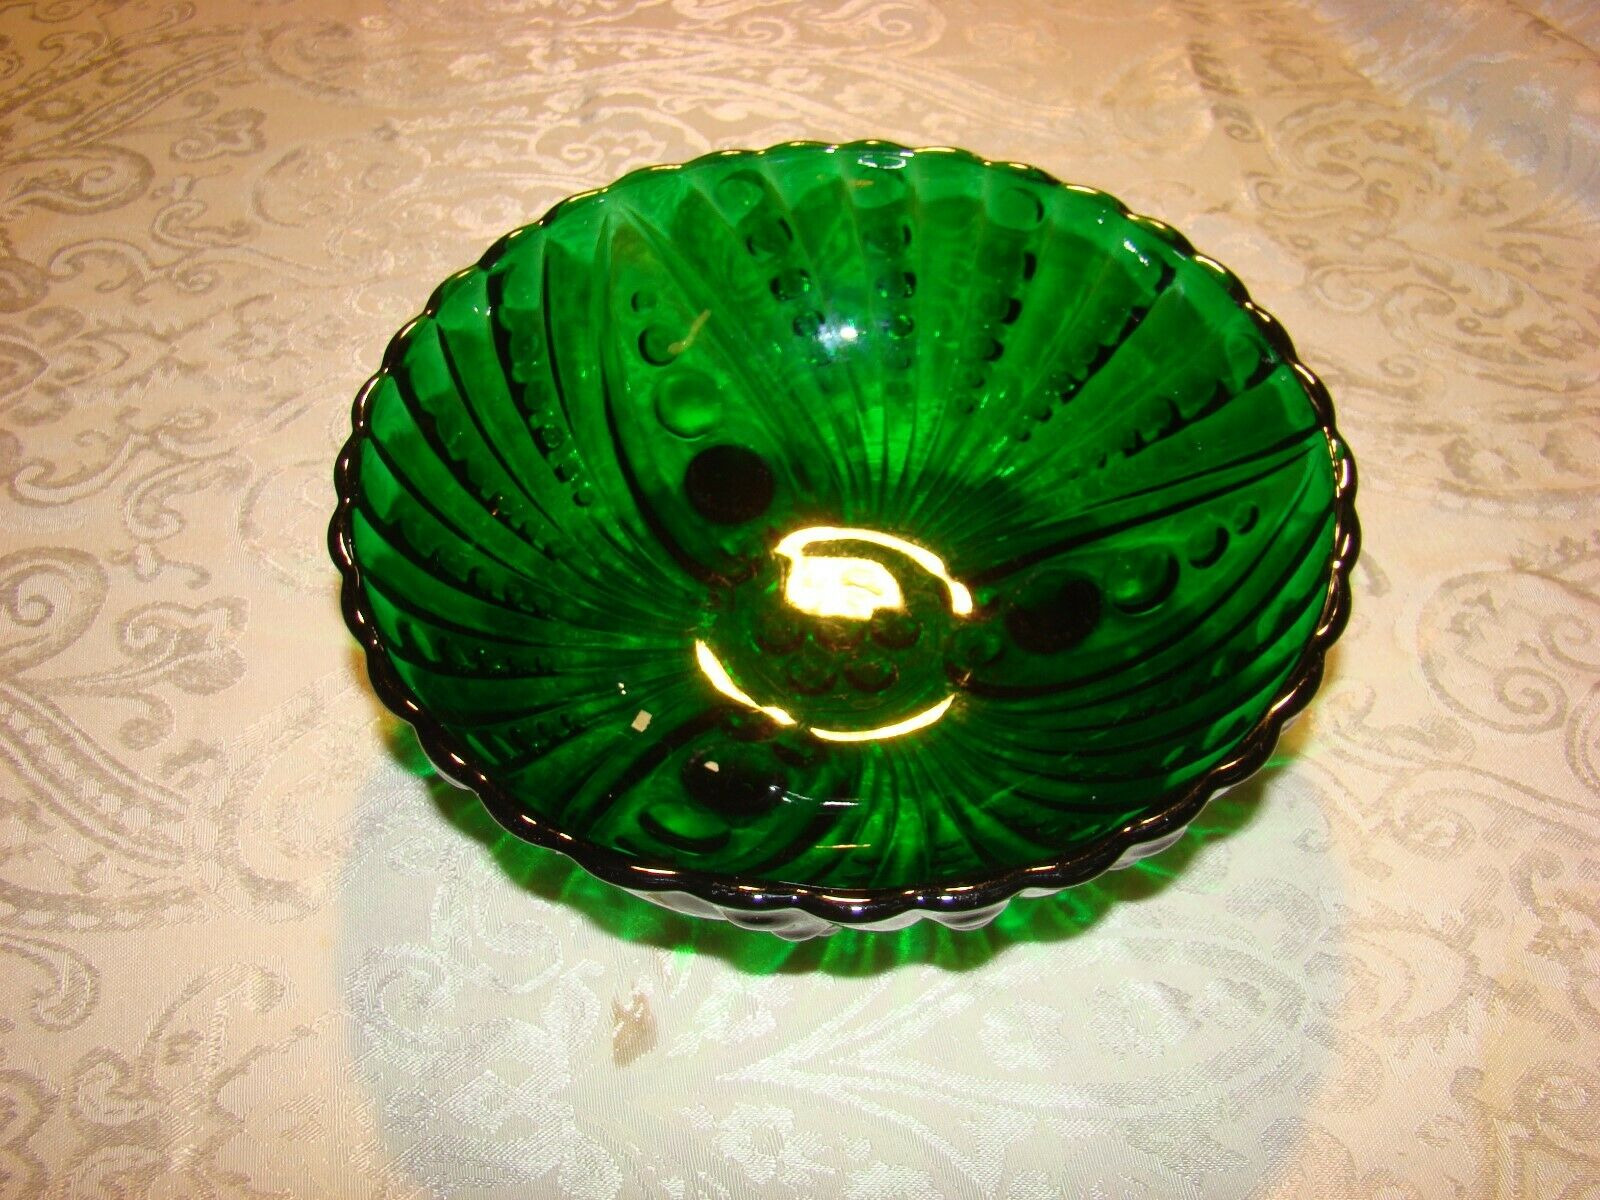 Anchor Hocking Inspiration Footed Green Depression Glass Bowl 8.5" X 2 7/8"